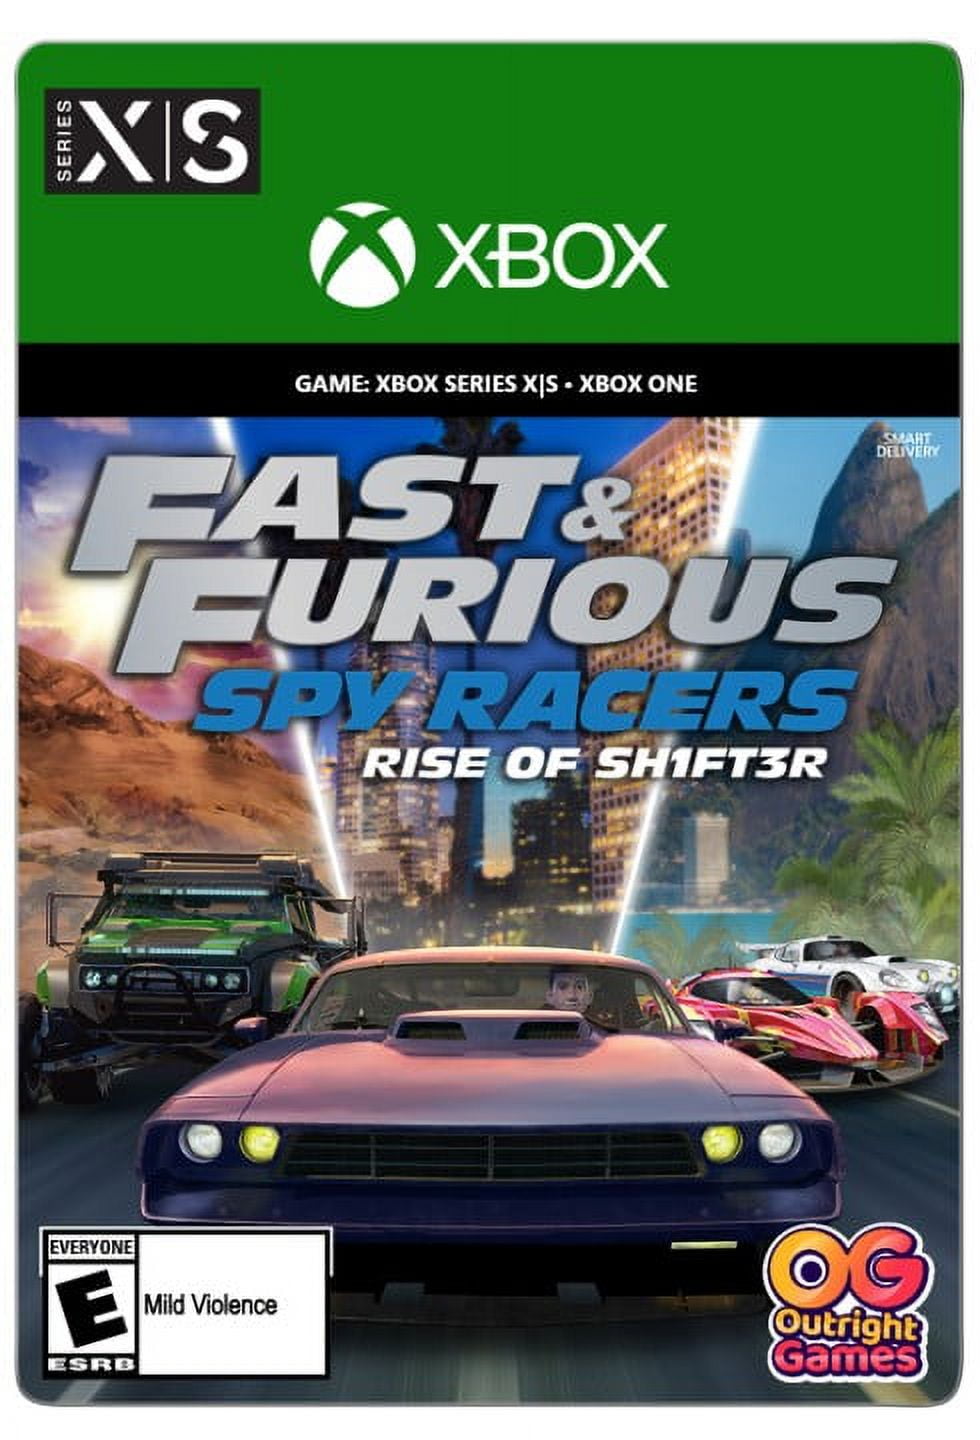 Fast & Furious: Spy Racers Rise Of Sh1ft3r Complete Edition - Xbox